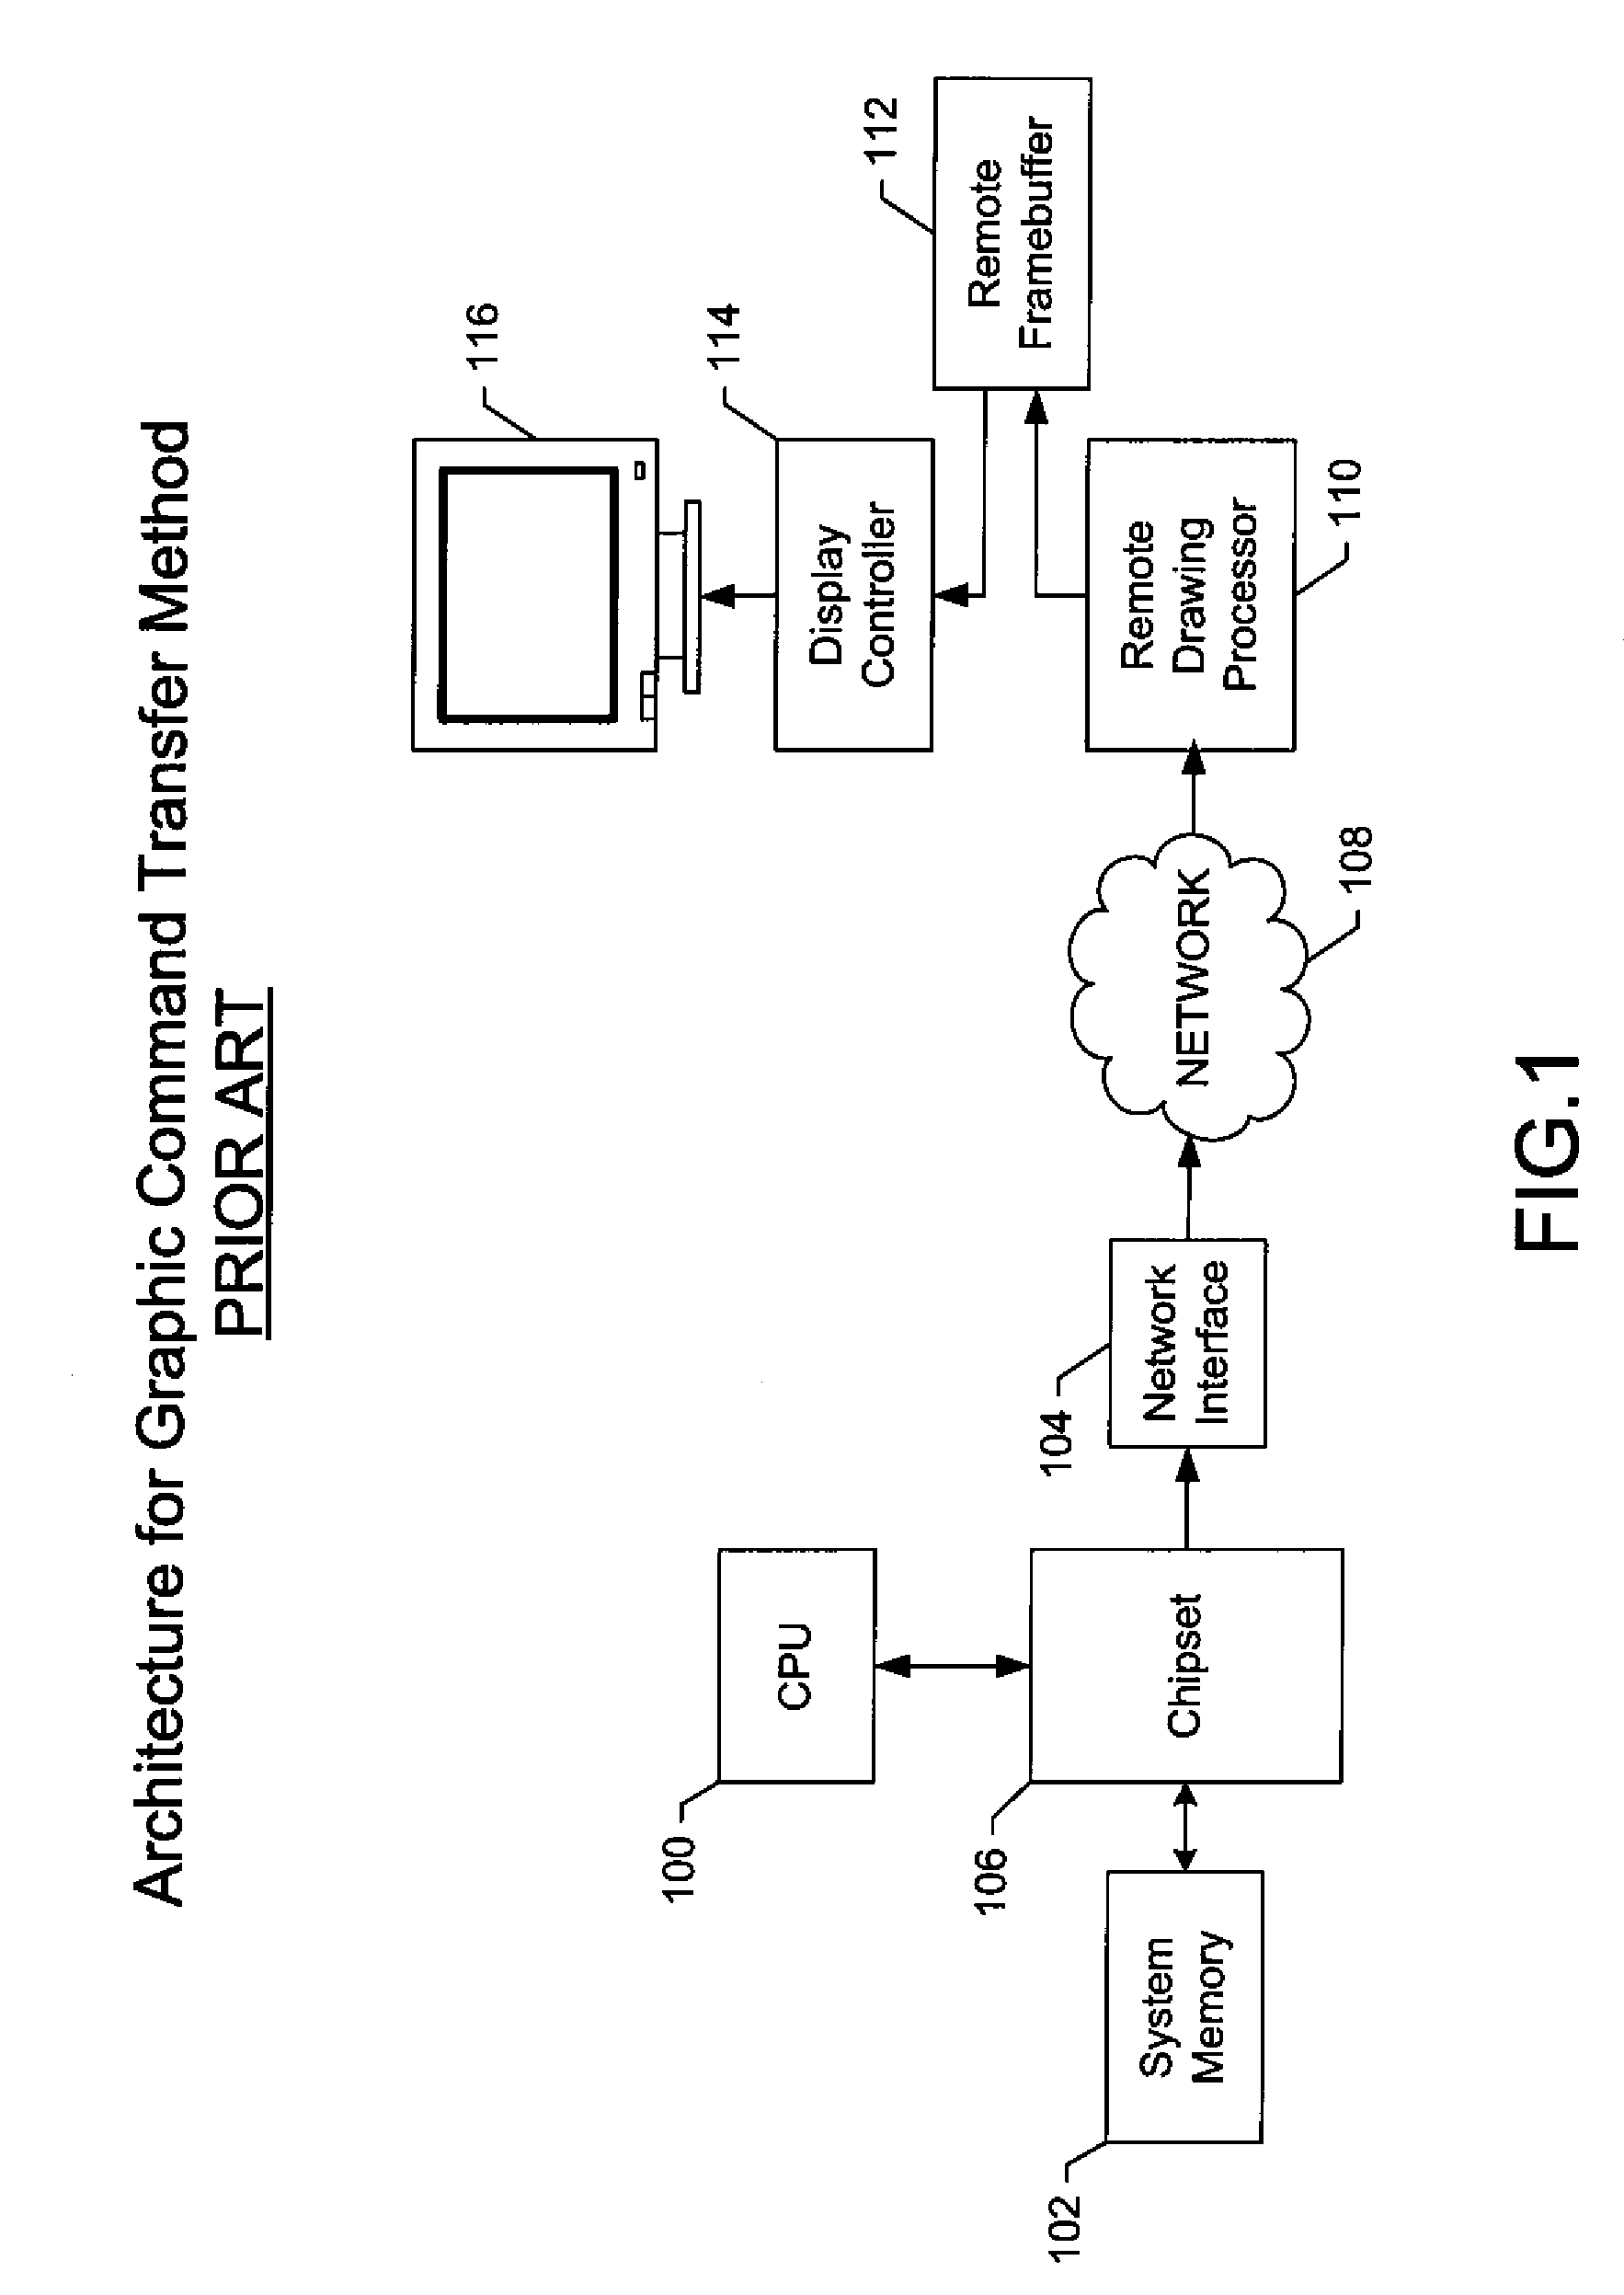 Methods and apparatus for interfacing a drawing memory with a remote display controller